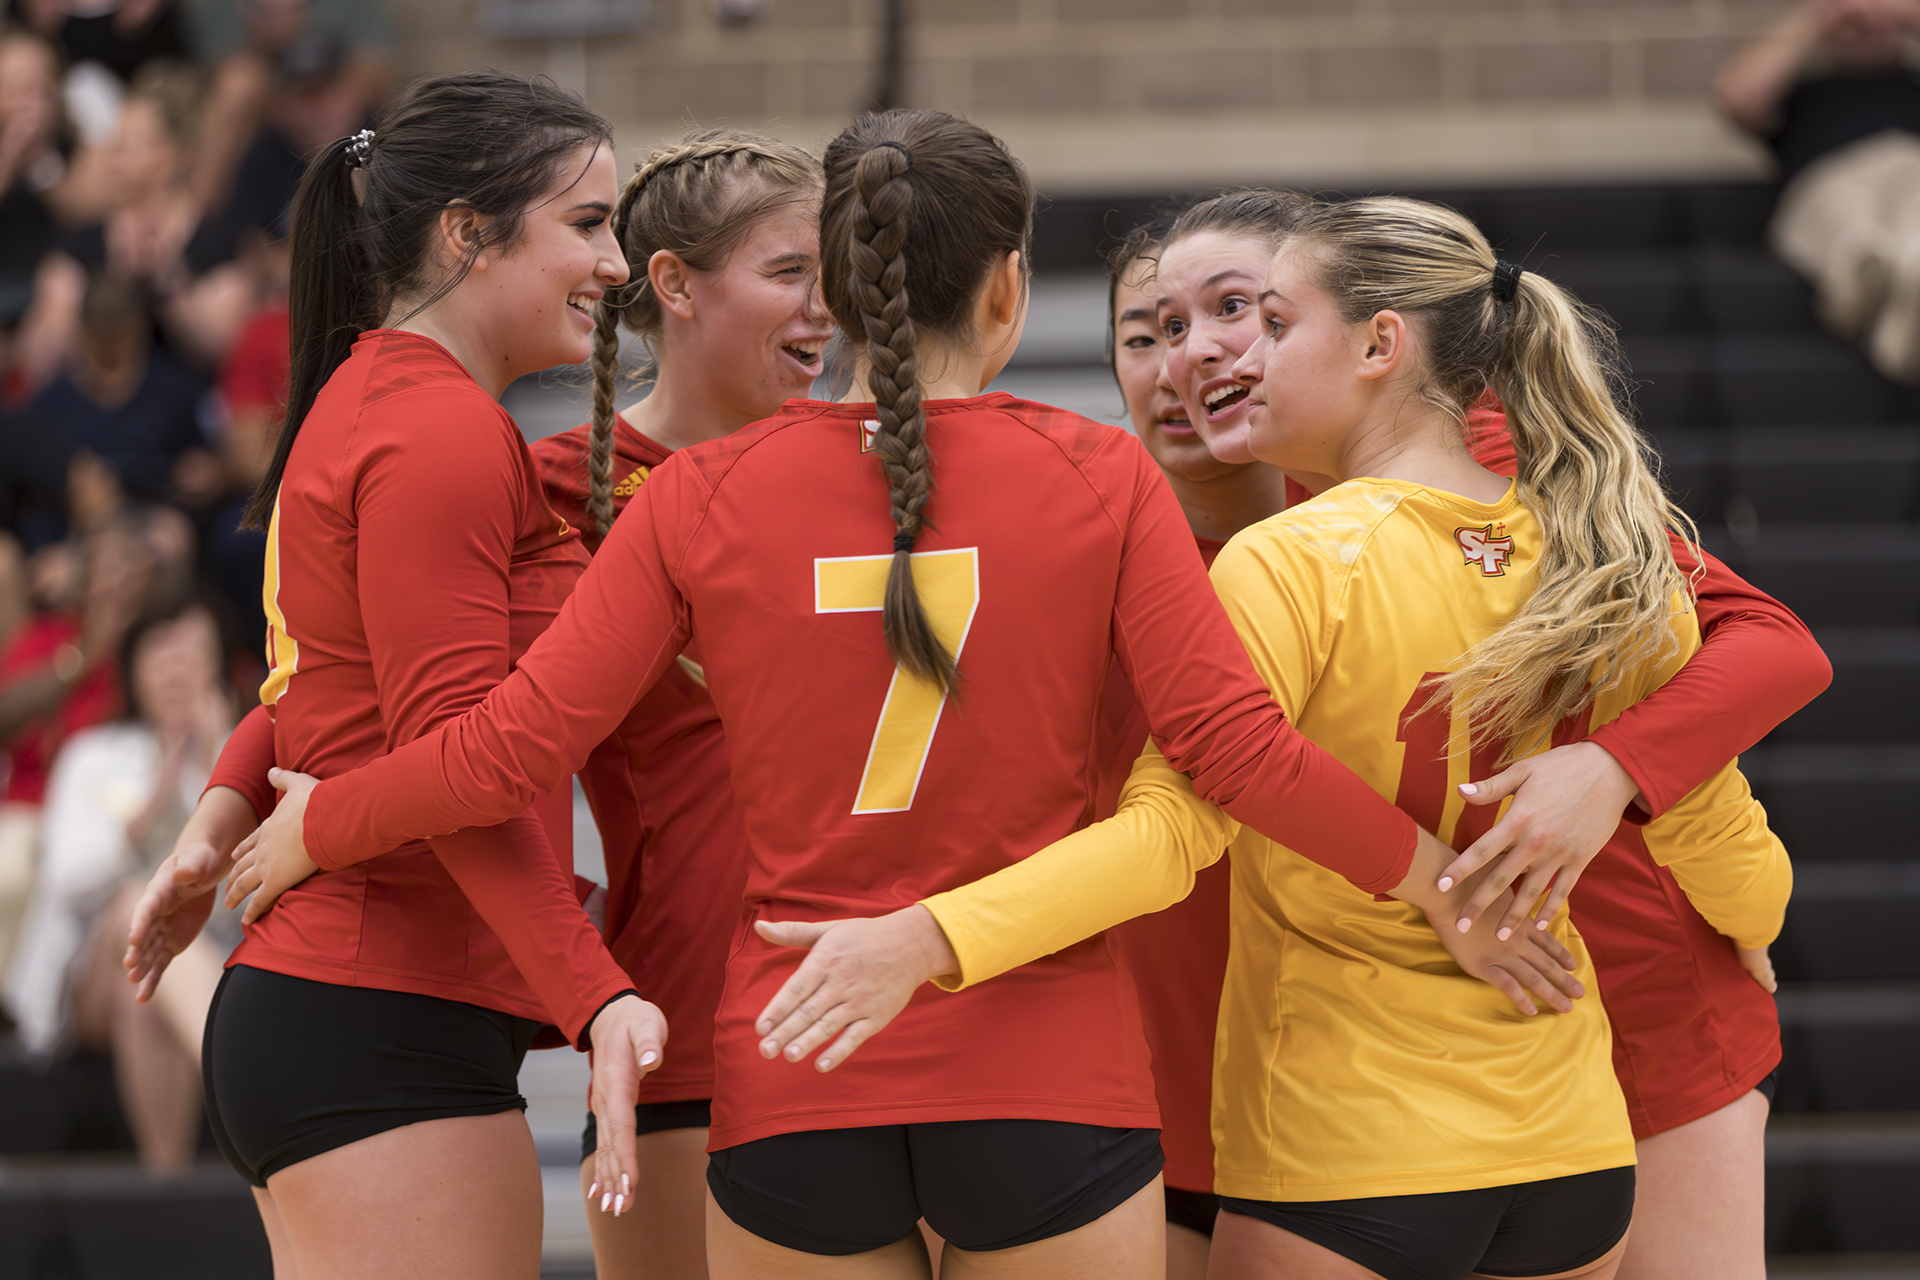 SF Volleyball sweeps Franklin at league midpoint